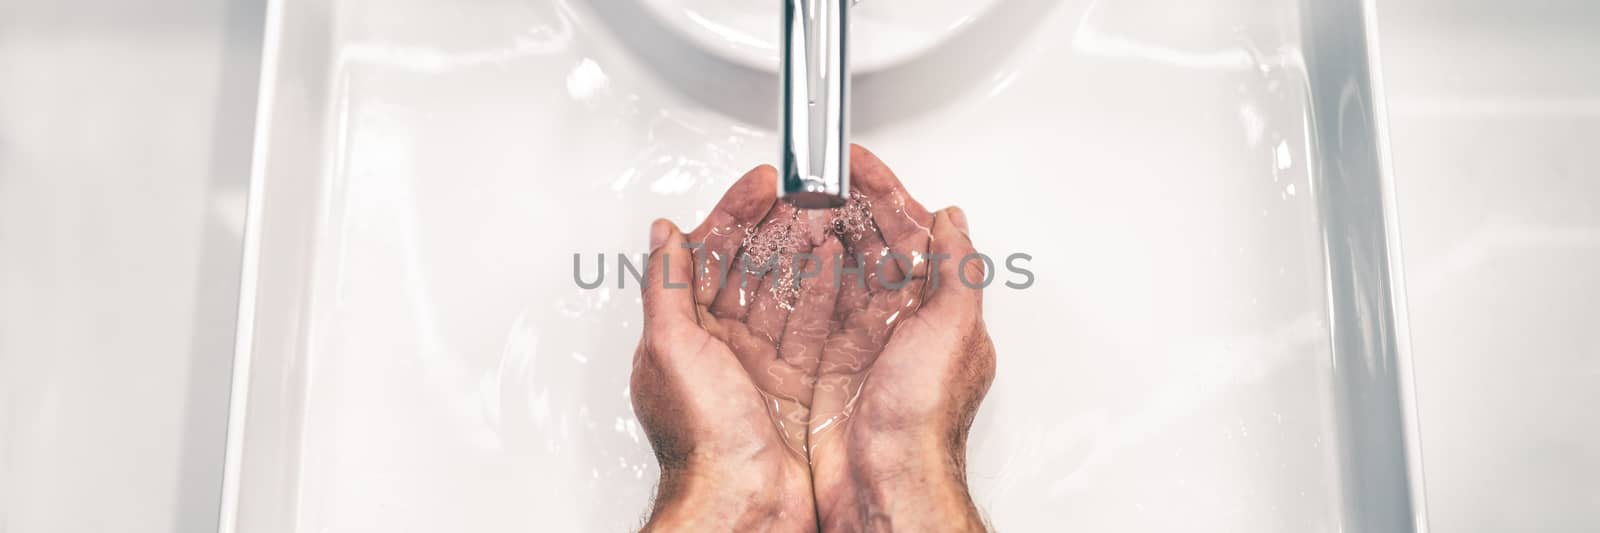 COVID-19 Coronavirus prevention washing hands with soap at bathroom sink man hand hygiene for corona virus pandemic precaution by washing hands frequently for 20 seconds. Panoramic banner.